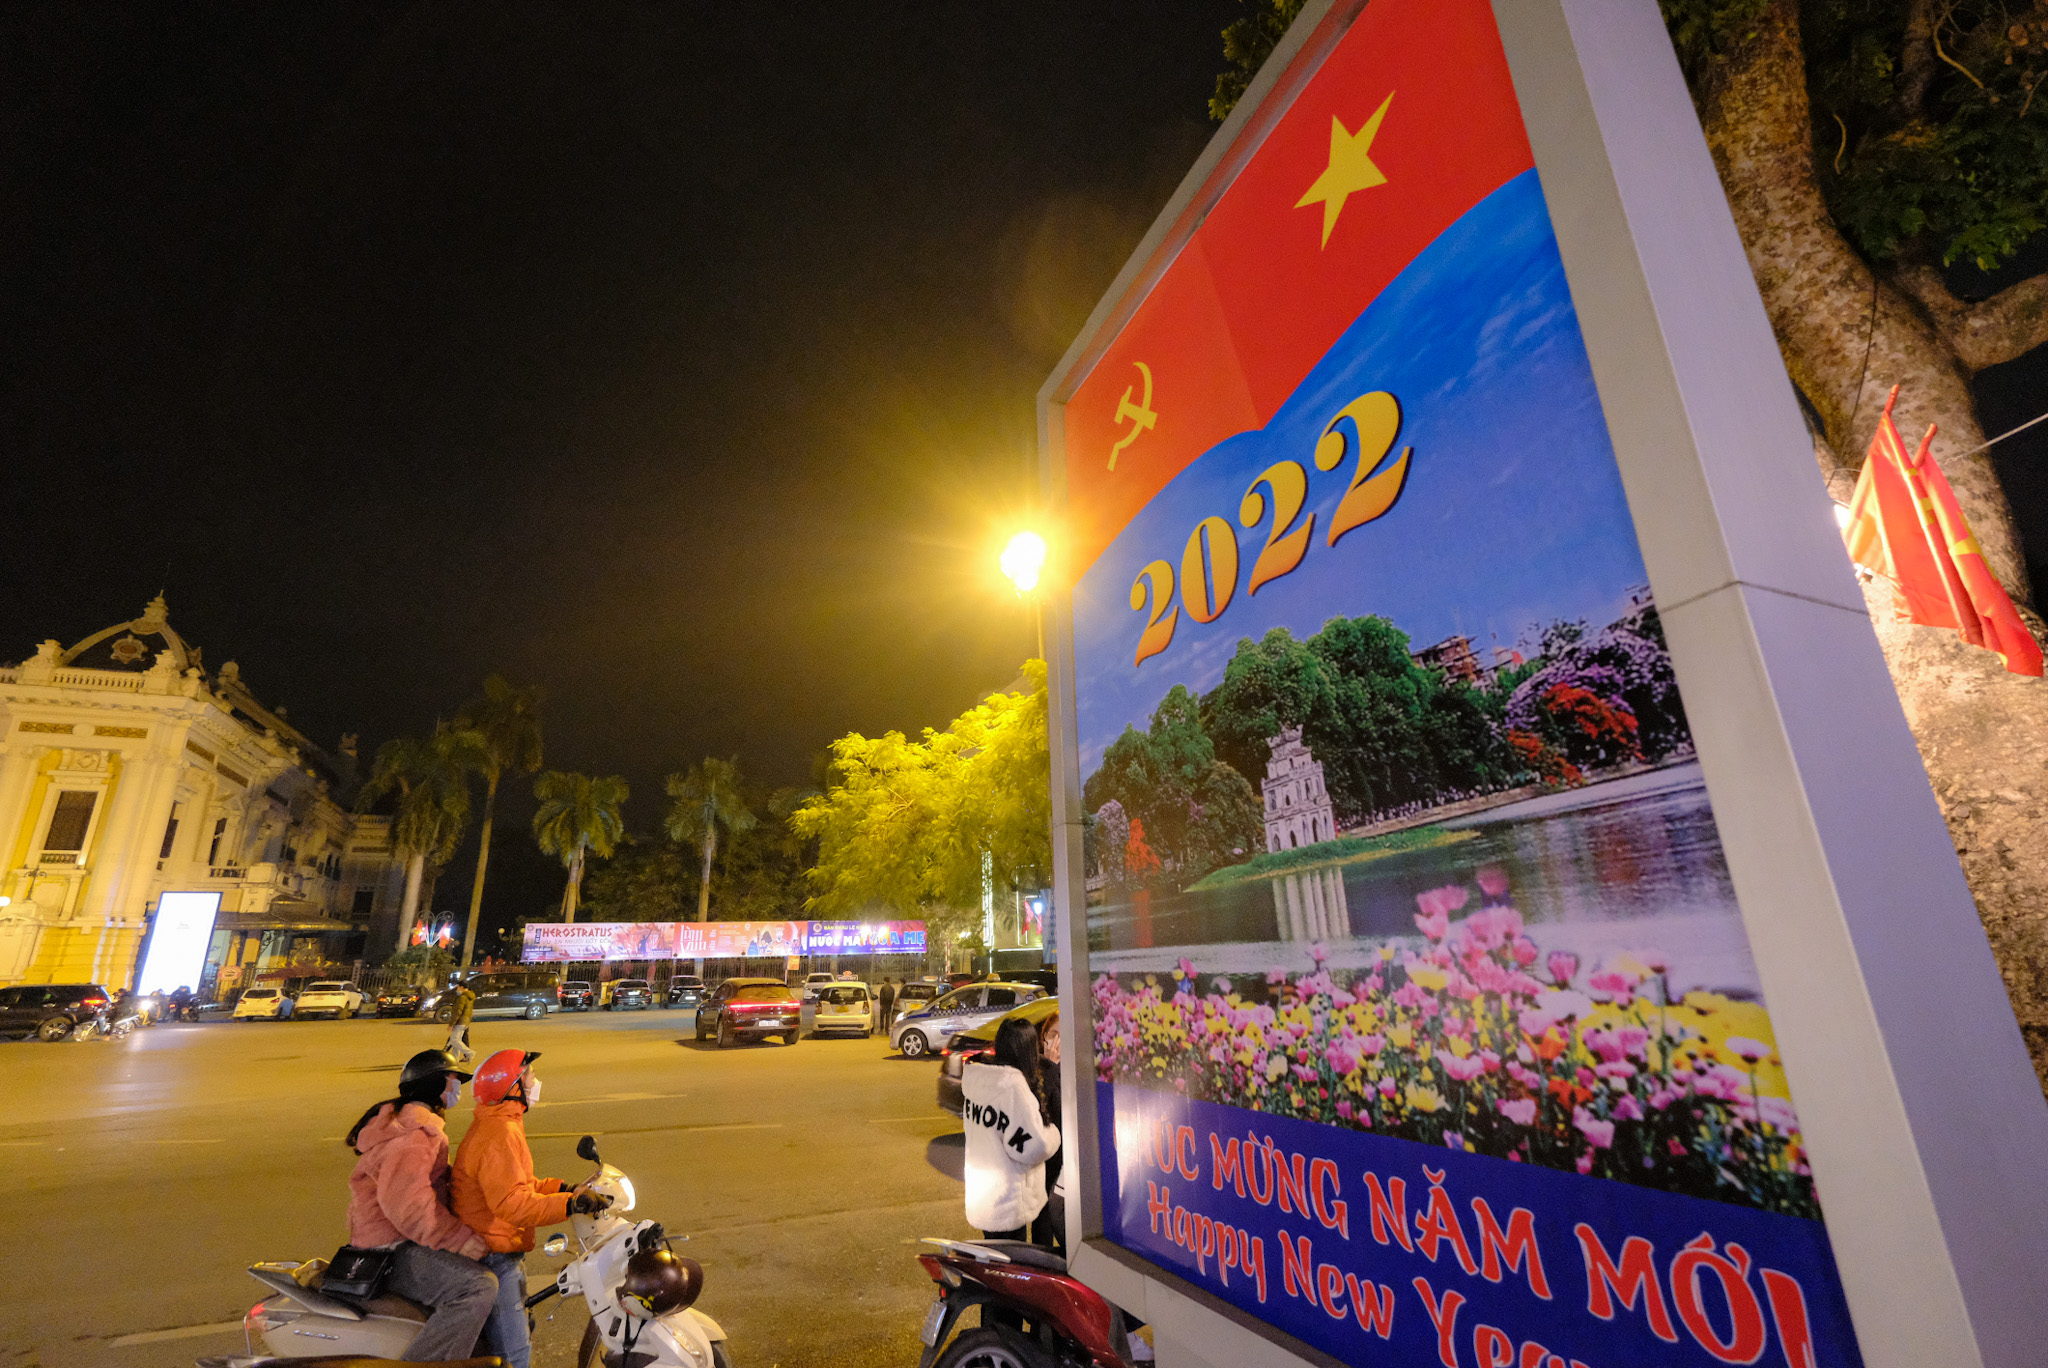 A motorbike goes past a 'Happy New Year' board in front of the Hanoi Opera House in Hanoi on the night of December 31, 2021. Photo: Tuoi Tre